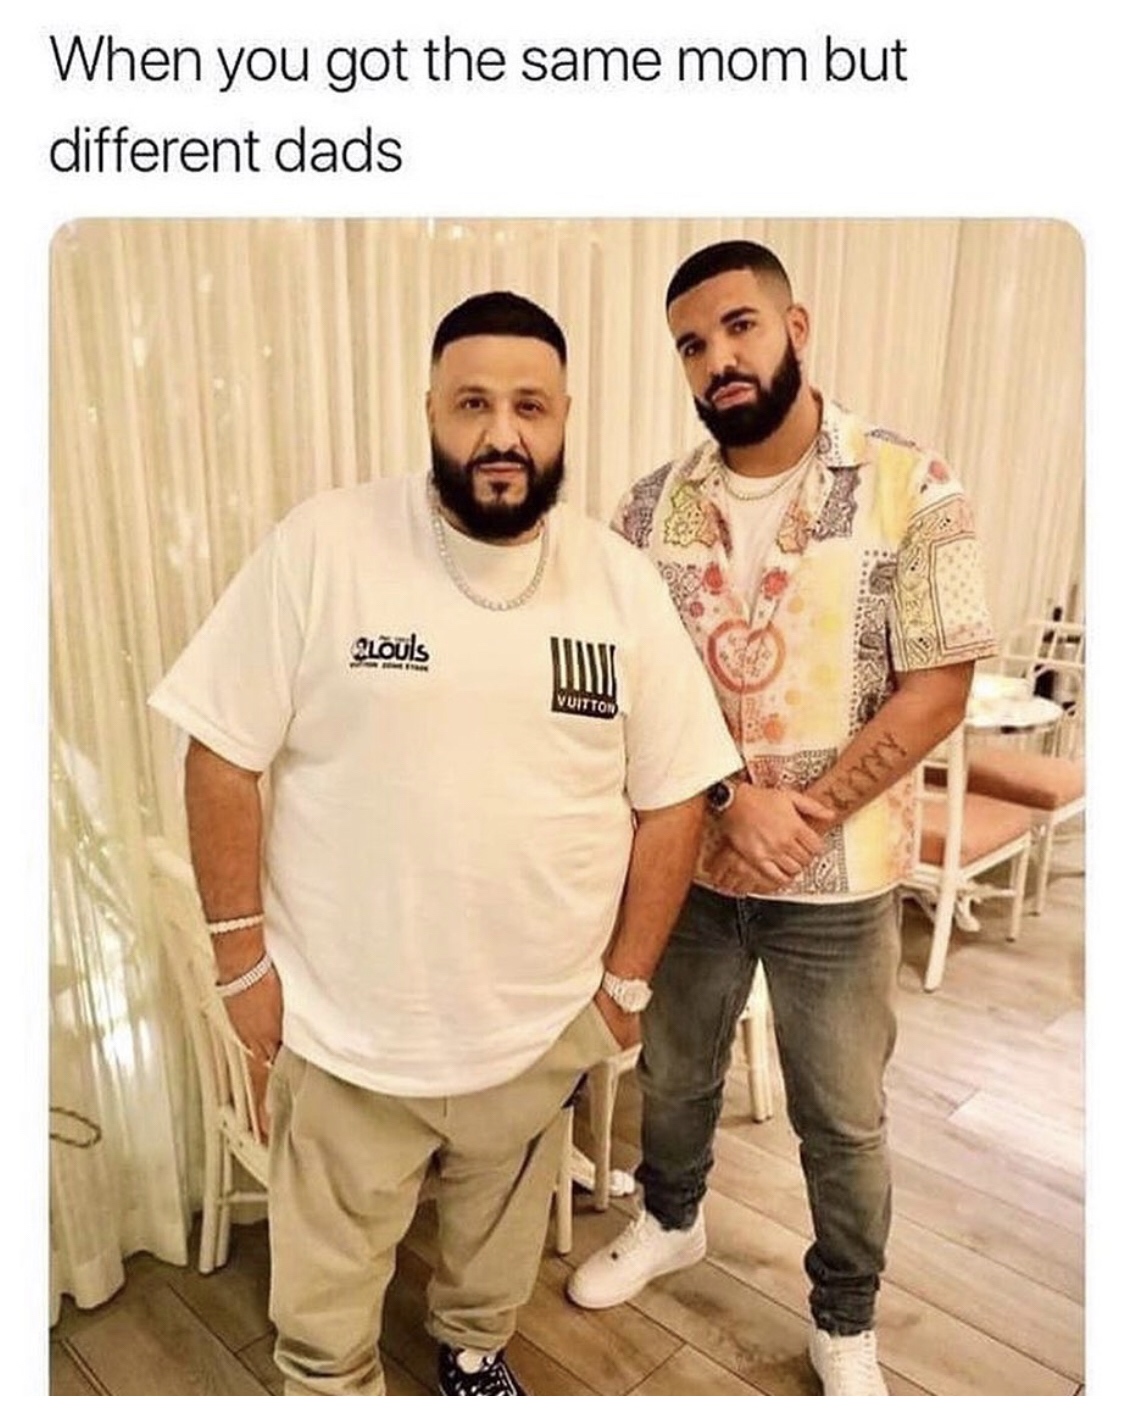 dj khaled and drake - When you got the same mom but different dads ALuls Vuitton